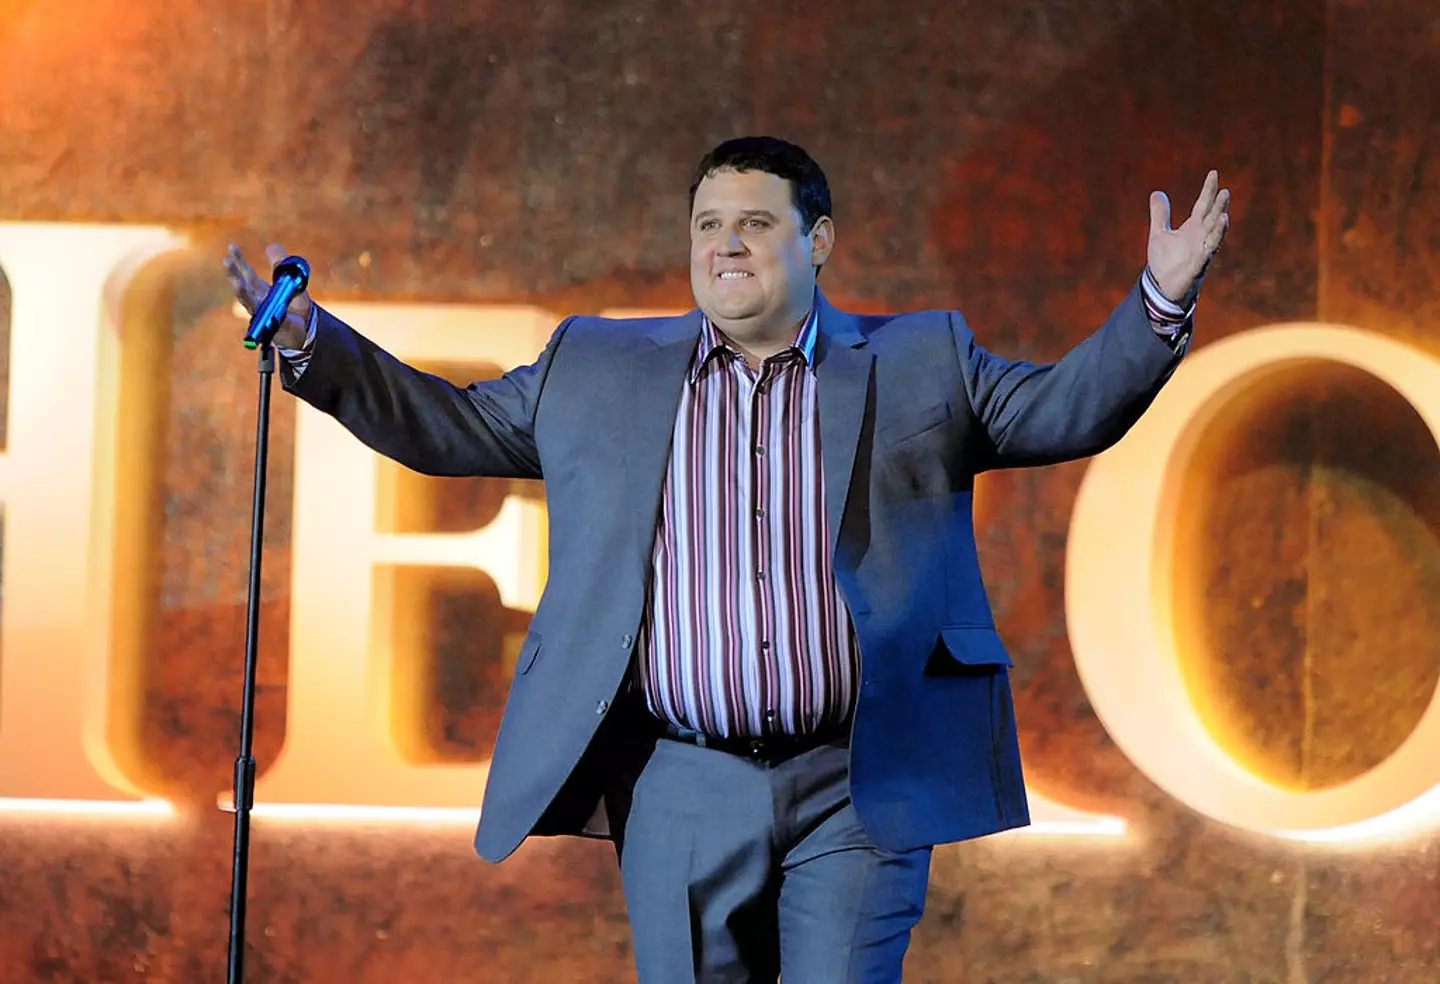 Peter Kay was supposed to be the venue's opening act. (Jim Dyson/Getty Images)